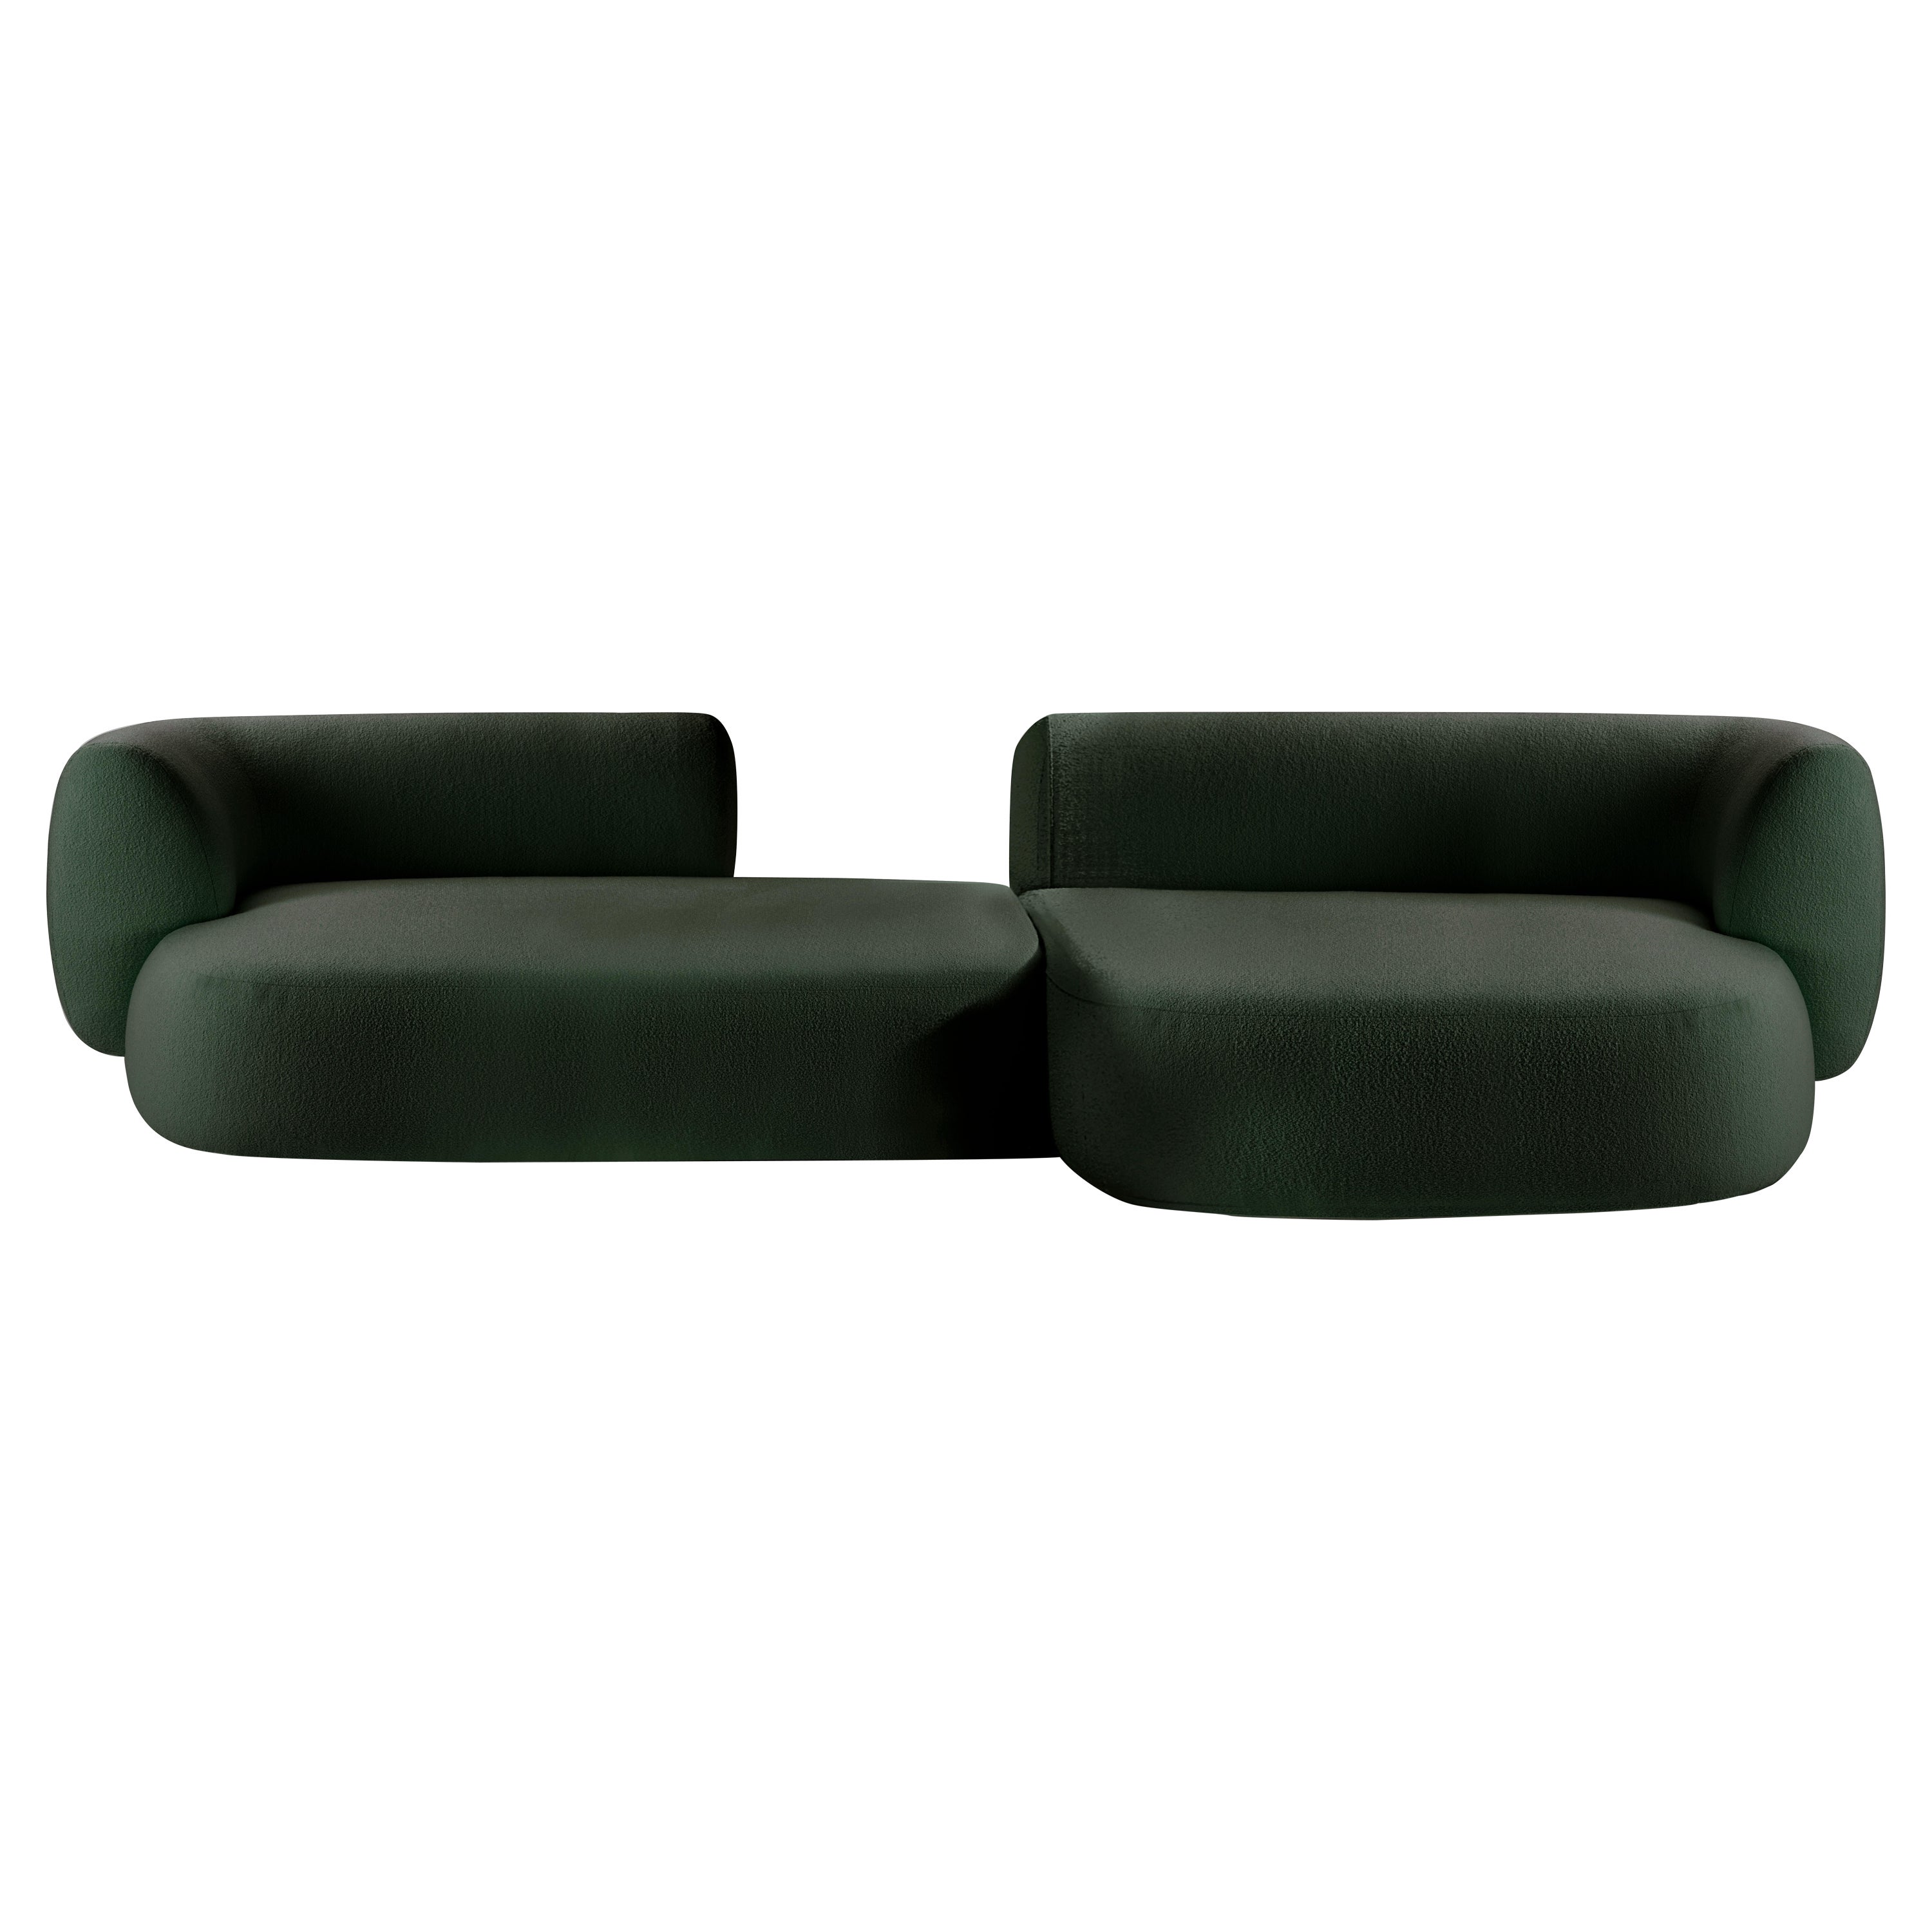 Contemporary Modern Hug Modular Sofa in Boucle Forest Fabric by Collector Studio